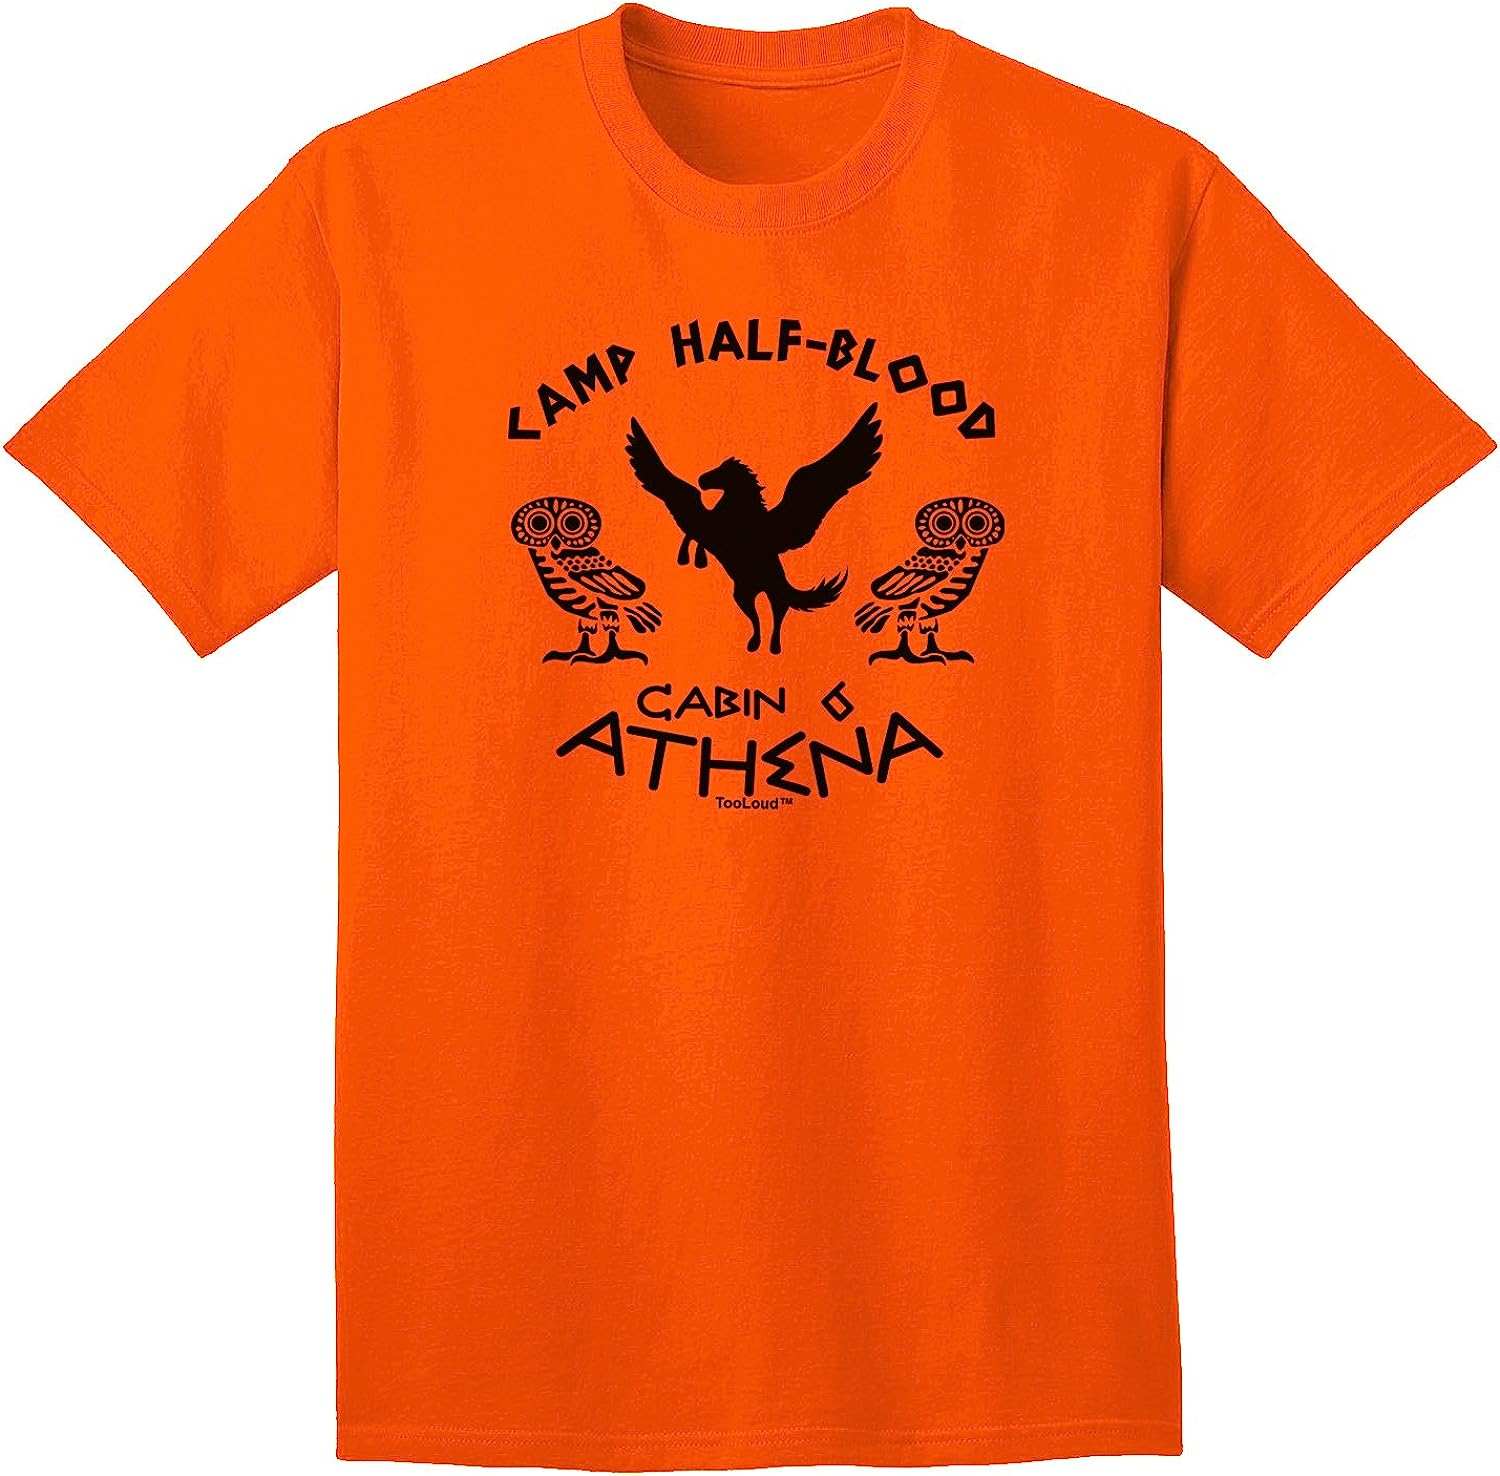 Breathable Soft Camp Half Blood Cabin 6 Athena T-Shirt For Men And Women